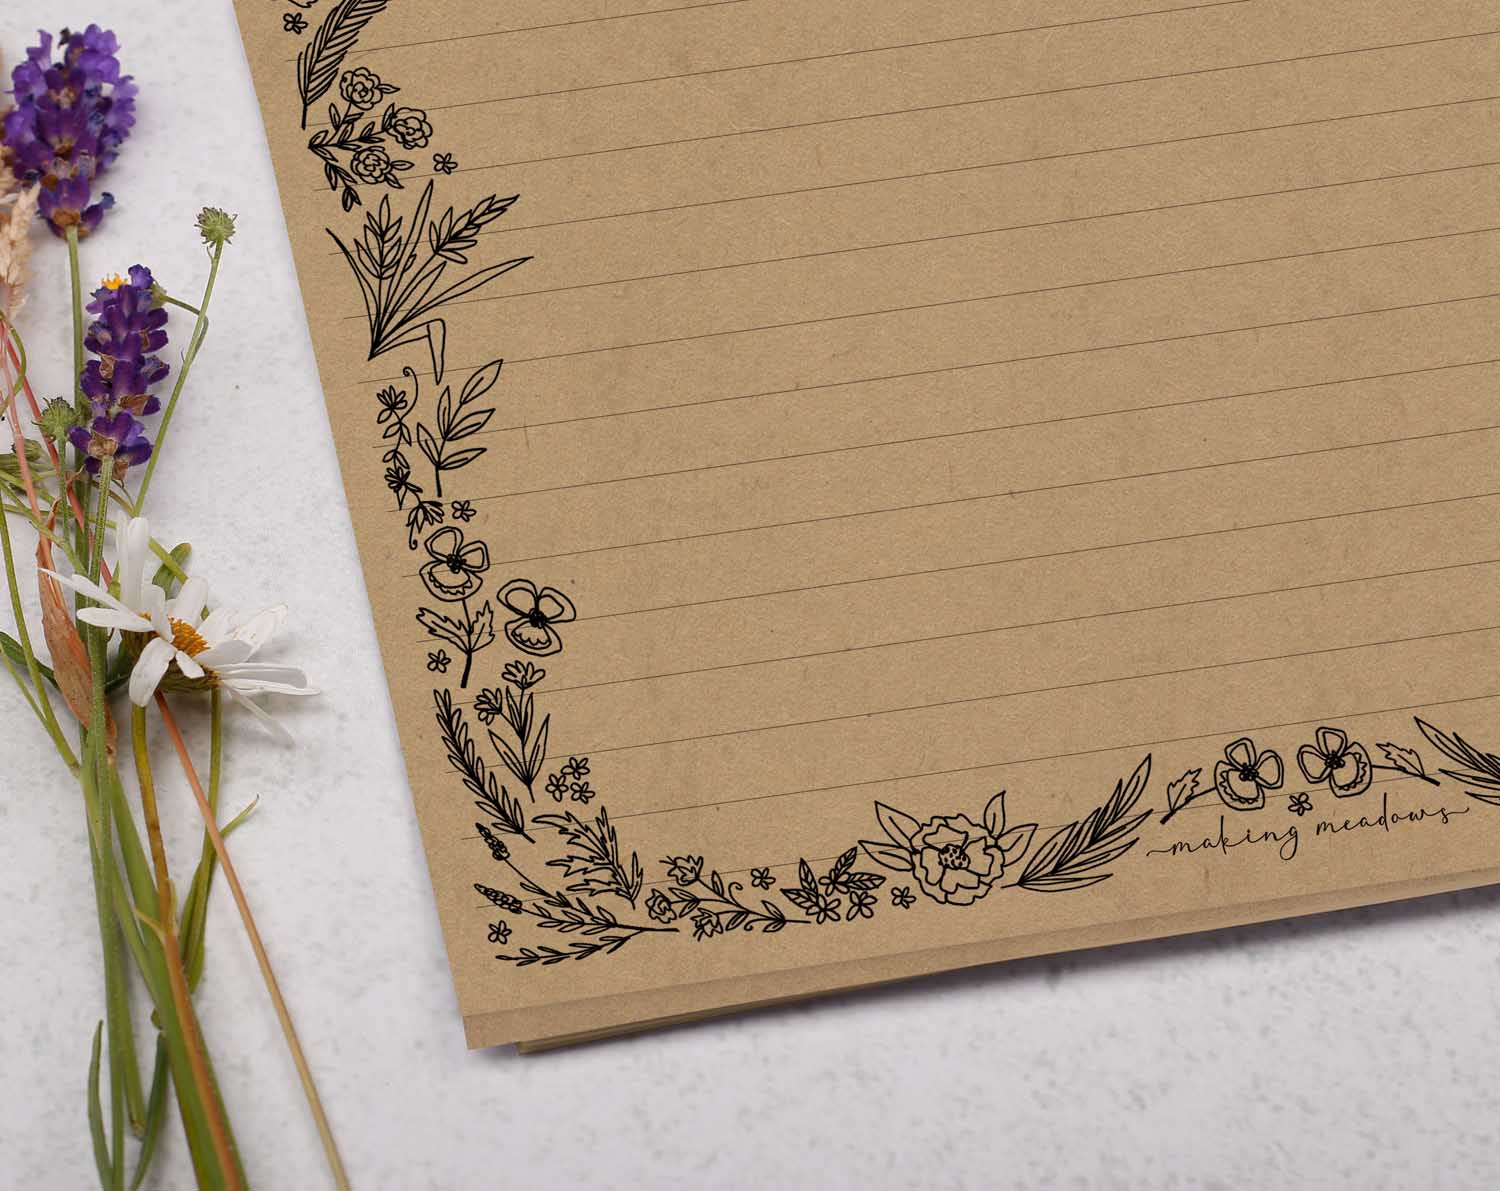 Printable Lined Letter Paper Minimalistic Flowers Stationery A4 US